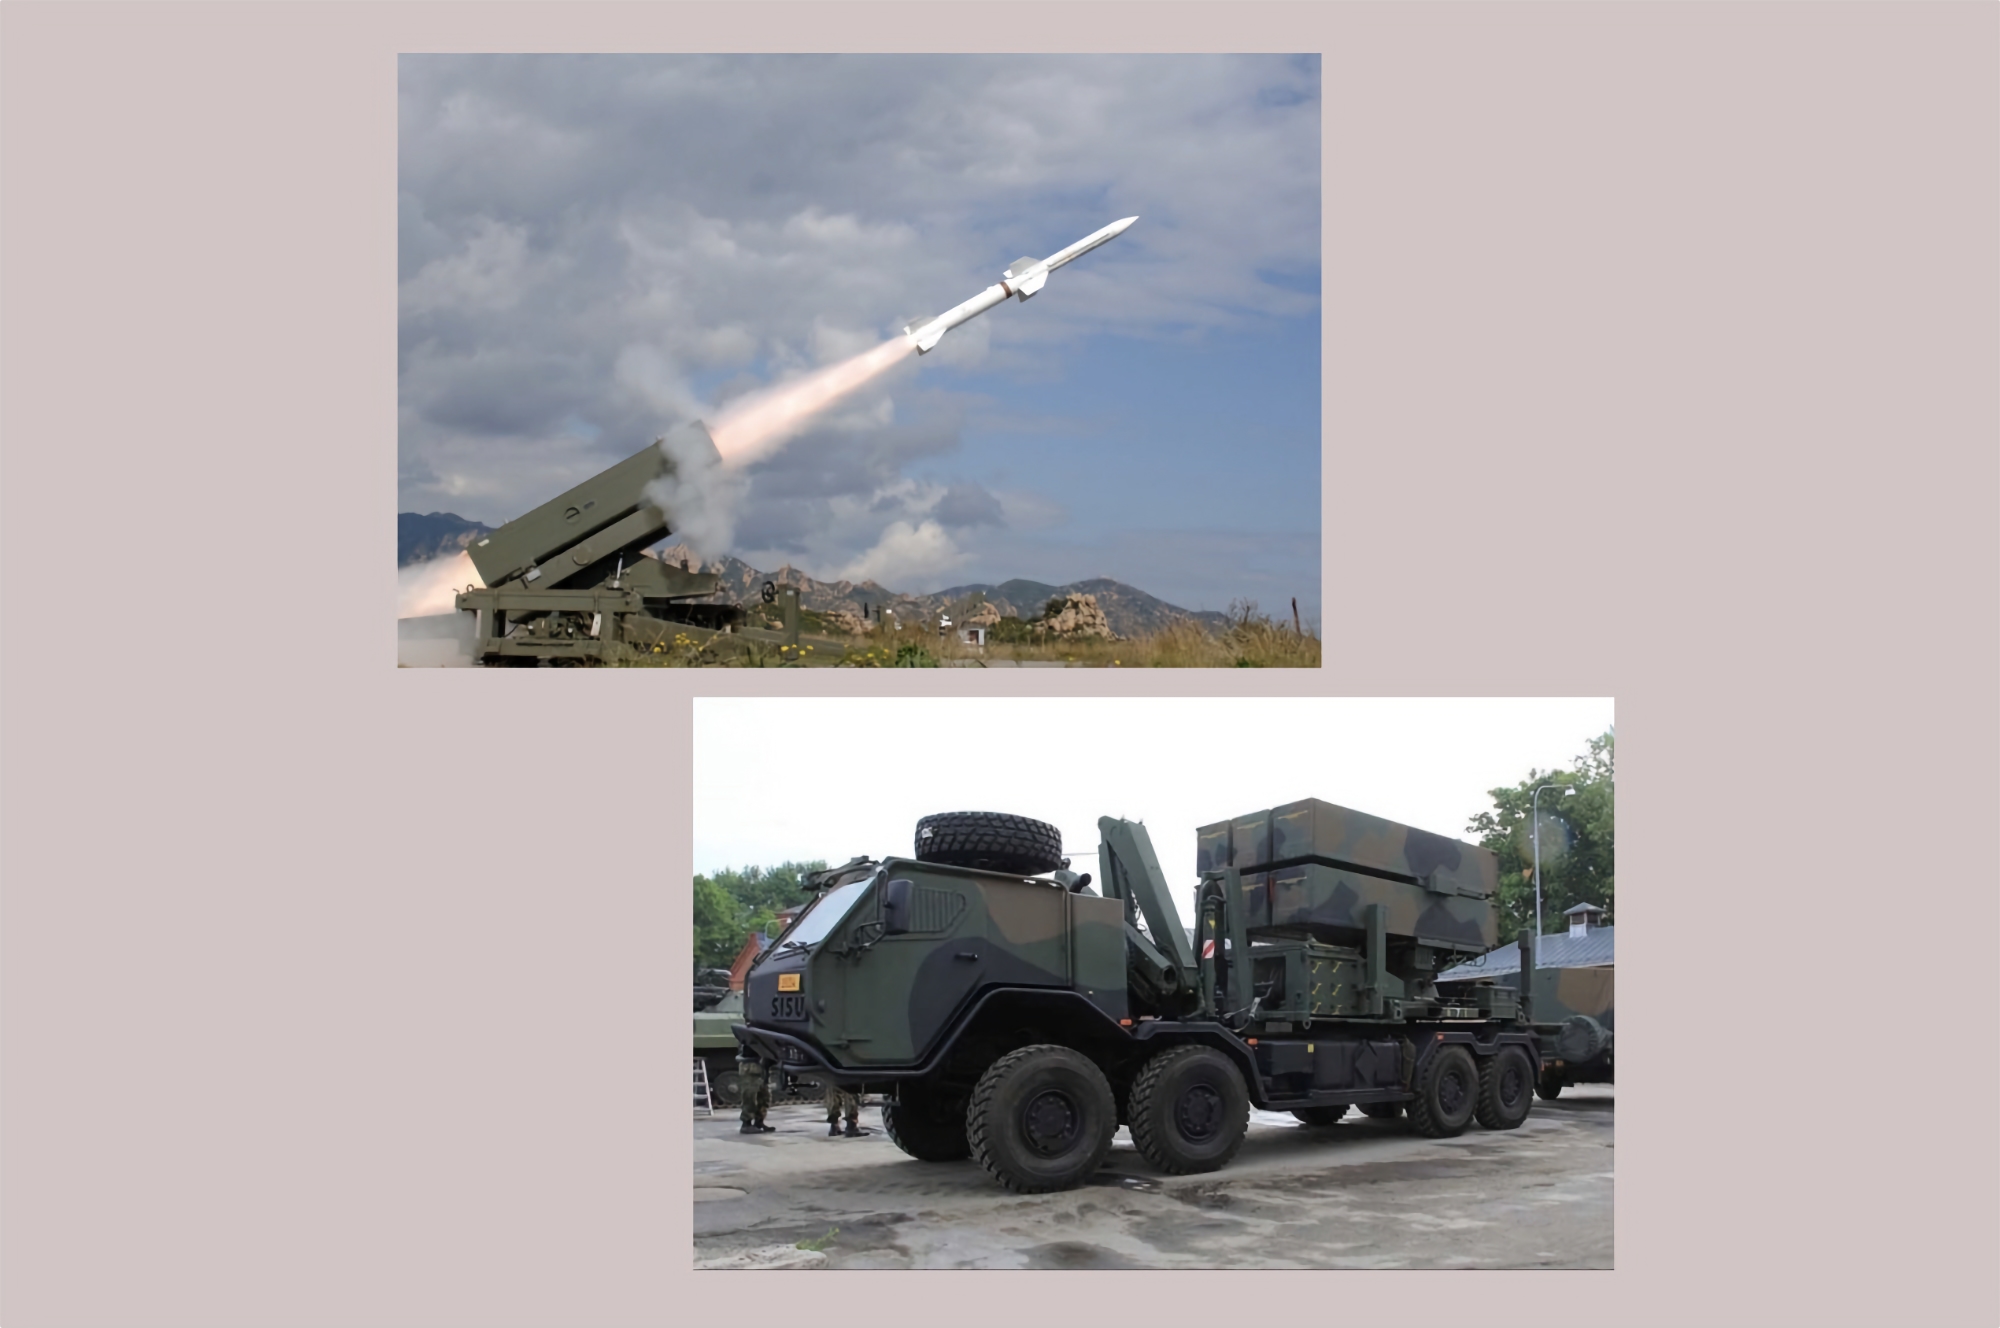 A great addition to the IRIS-T! Ukraine received NASAMS and Aspide surface-to-air missile systems